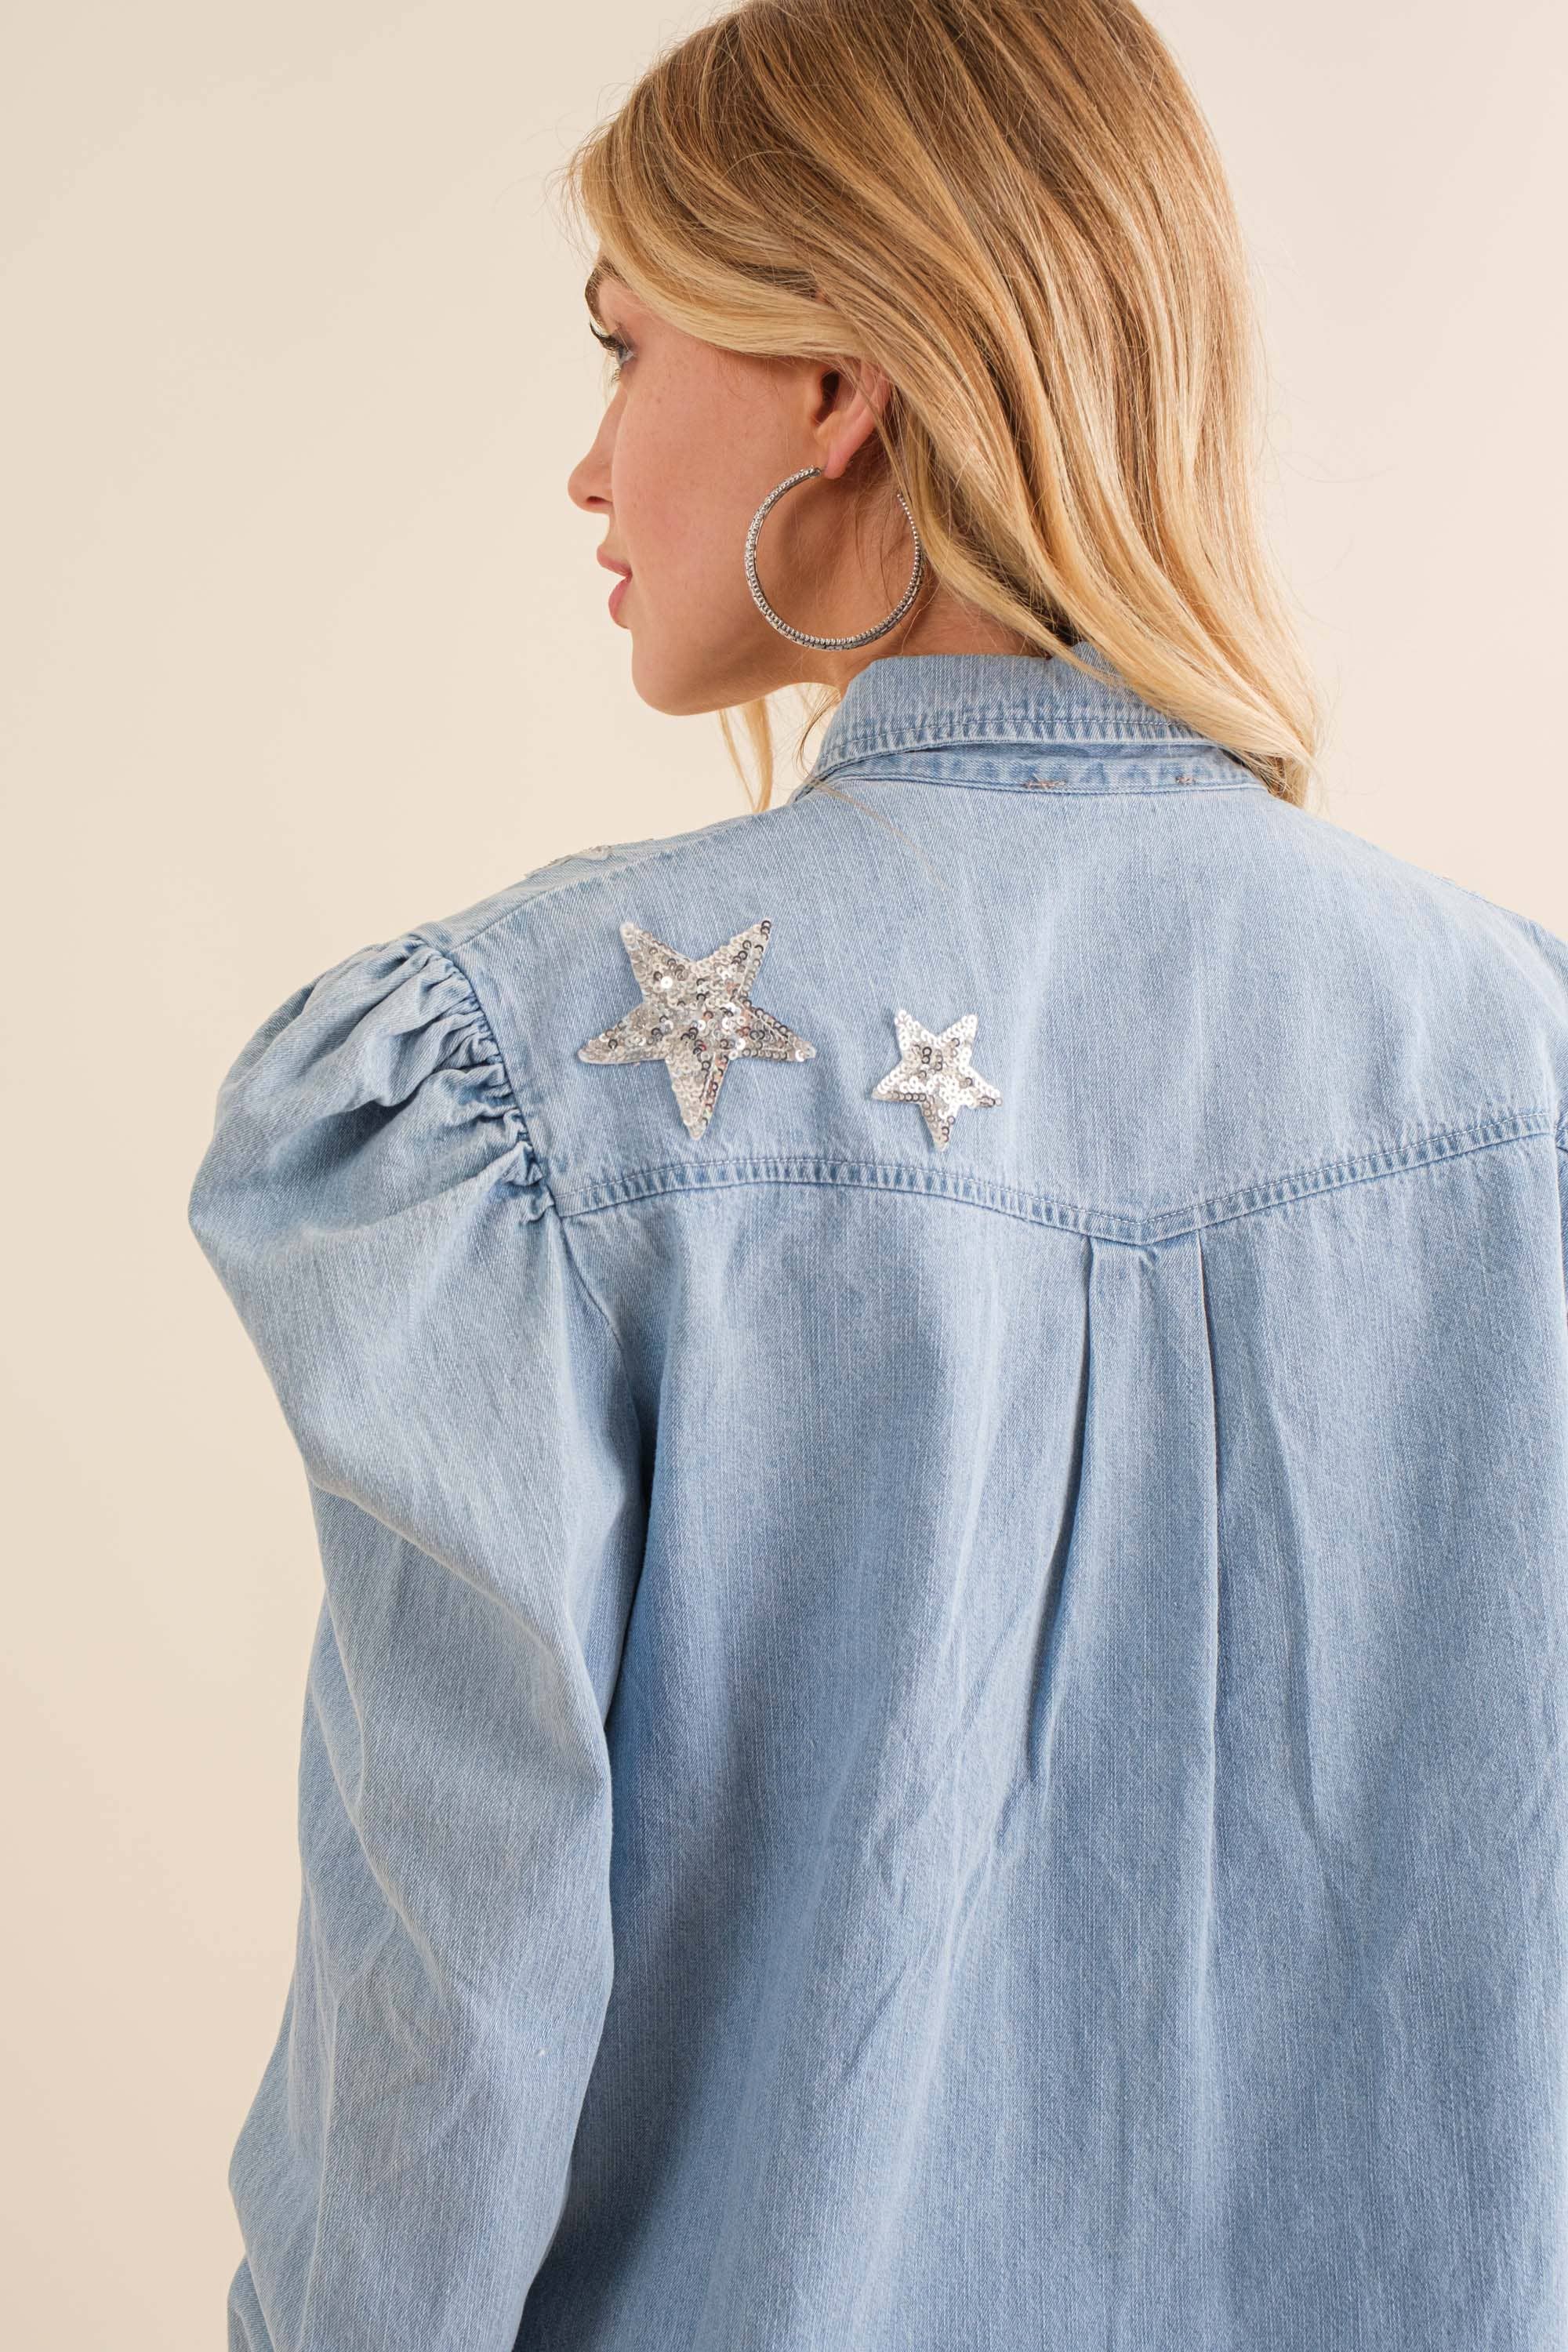 Sequin HOWDY Chambray Button Up with Puff Sleeves Shirt